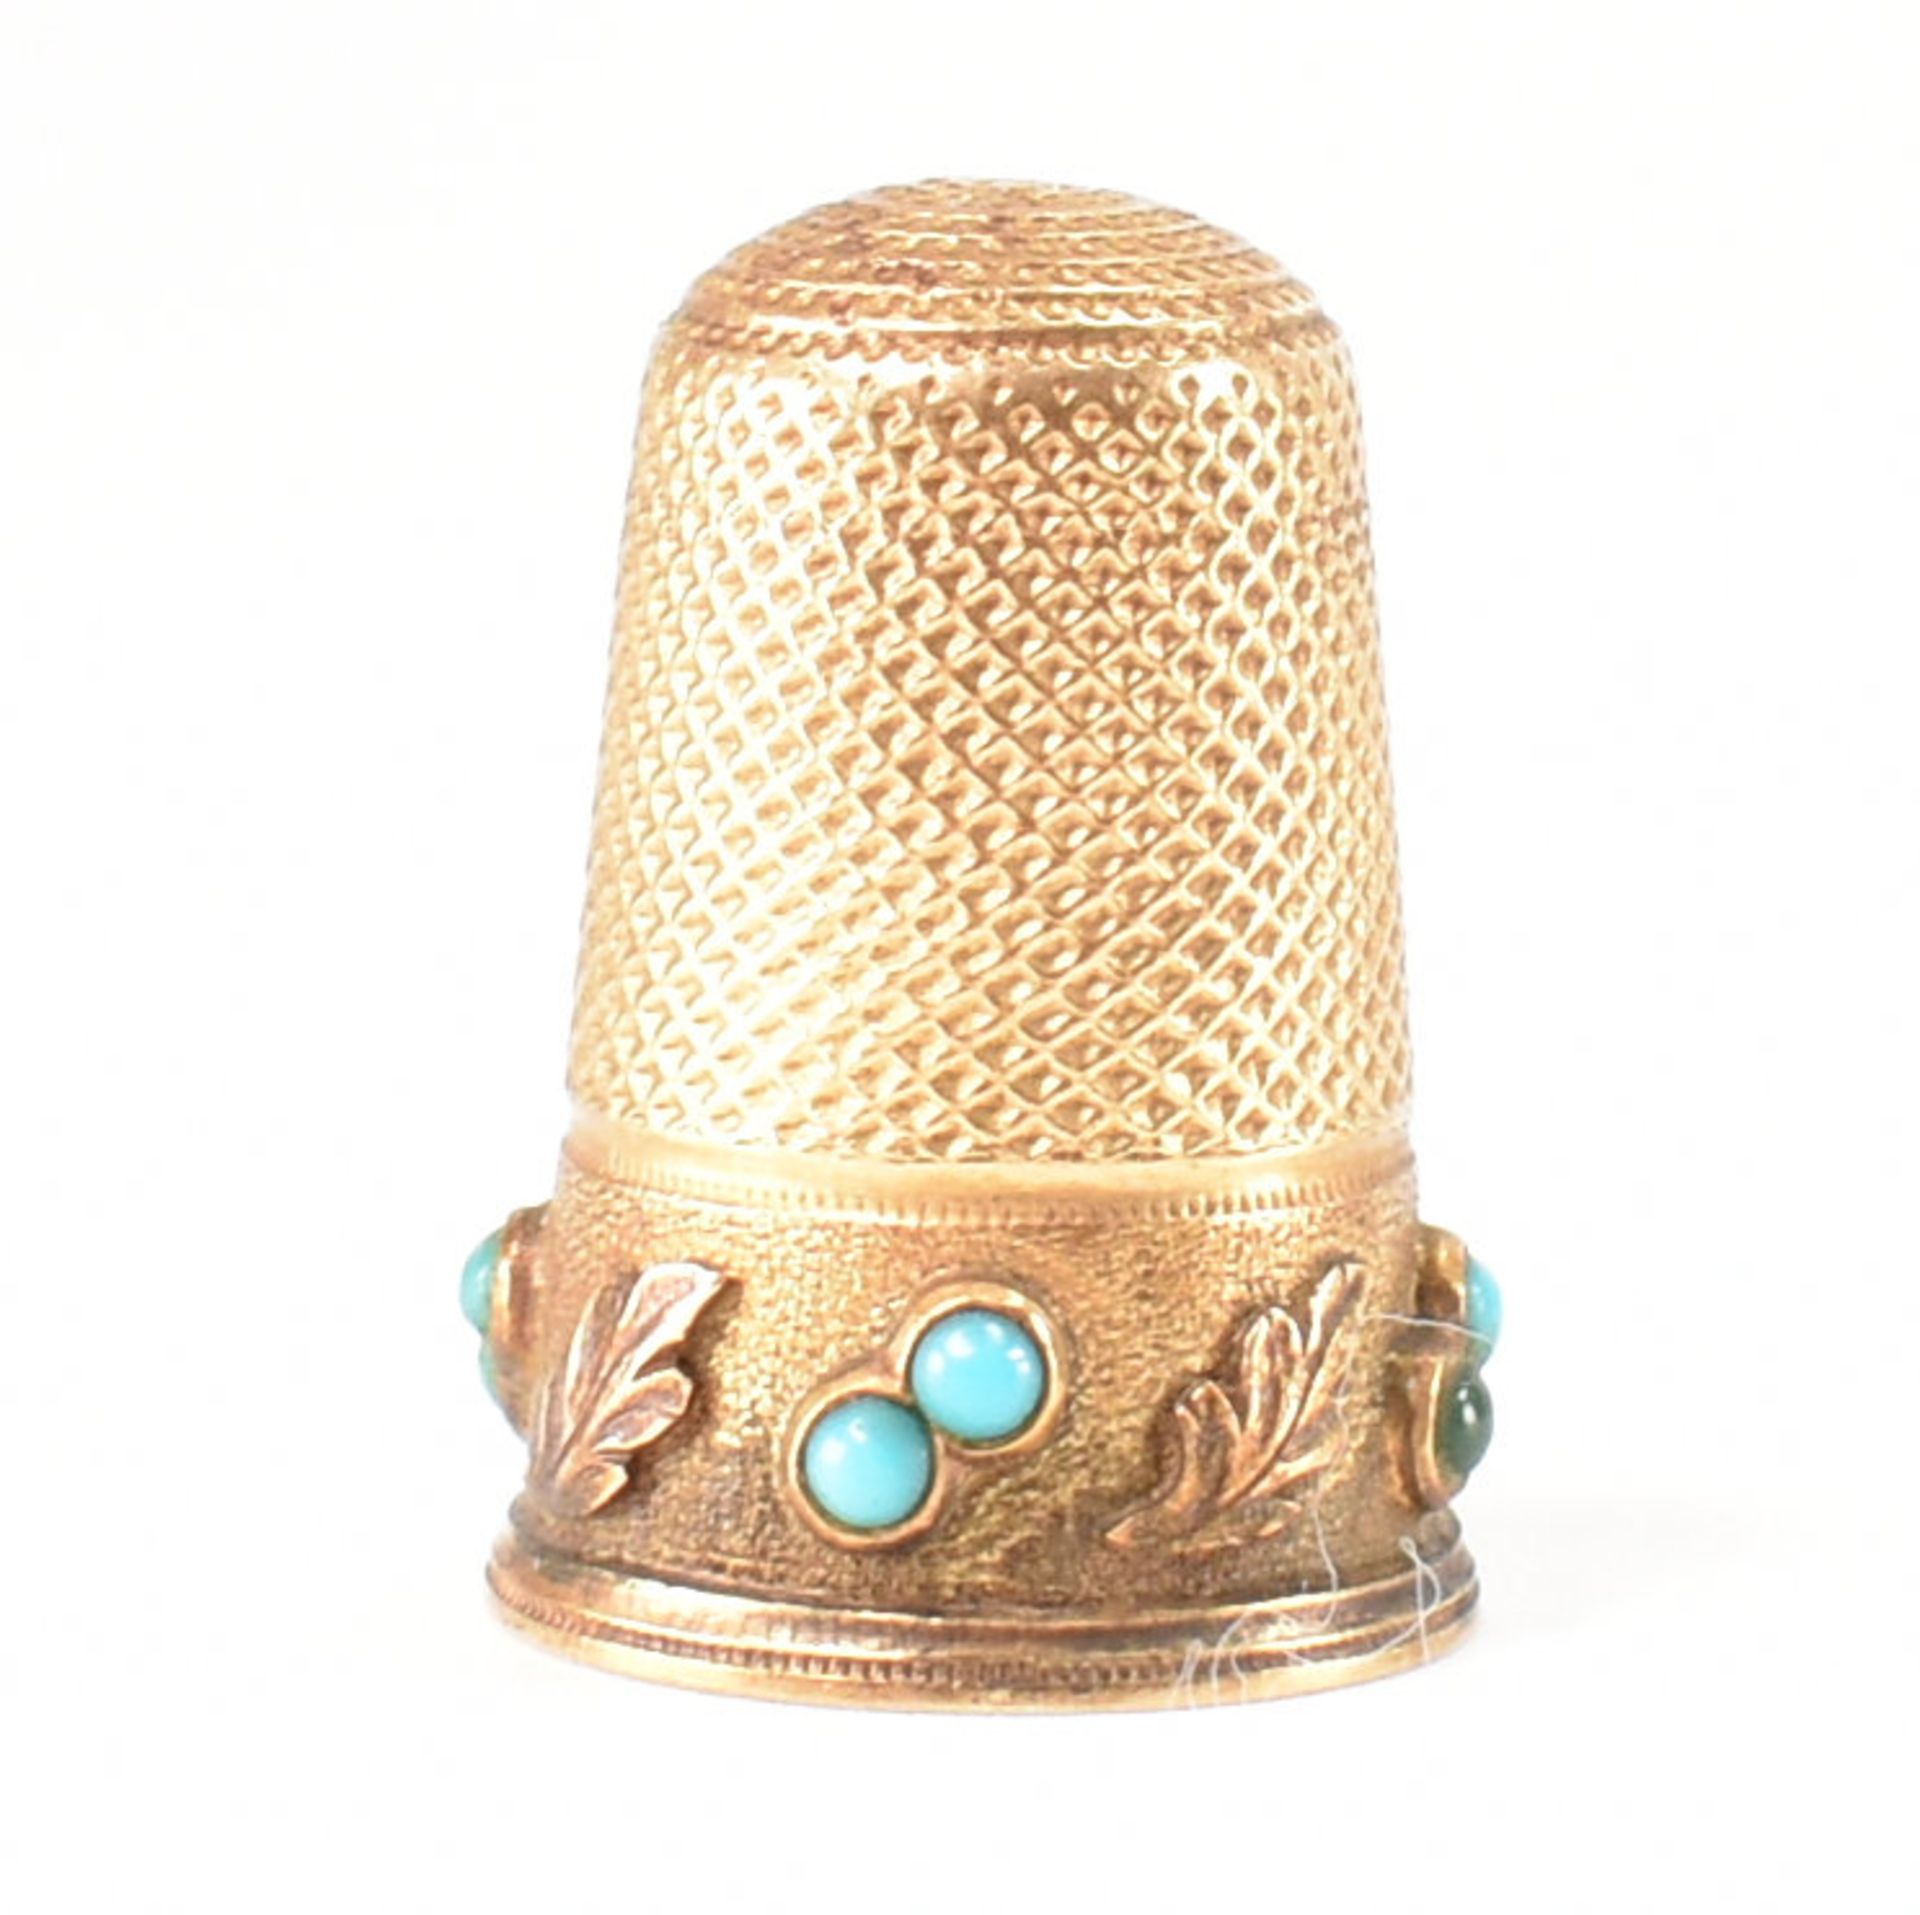 VICTORIAN GOLD & TURQUOISE THIMBLE - Image 4 of 7